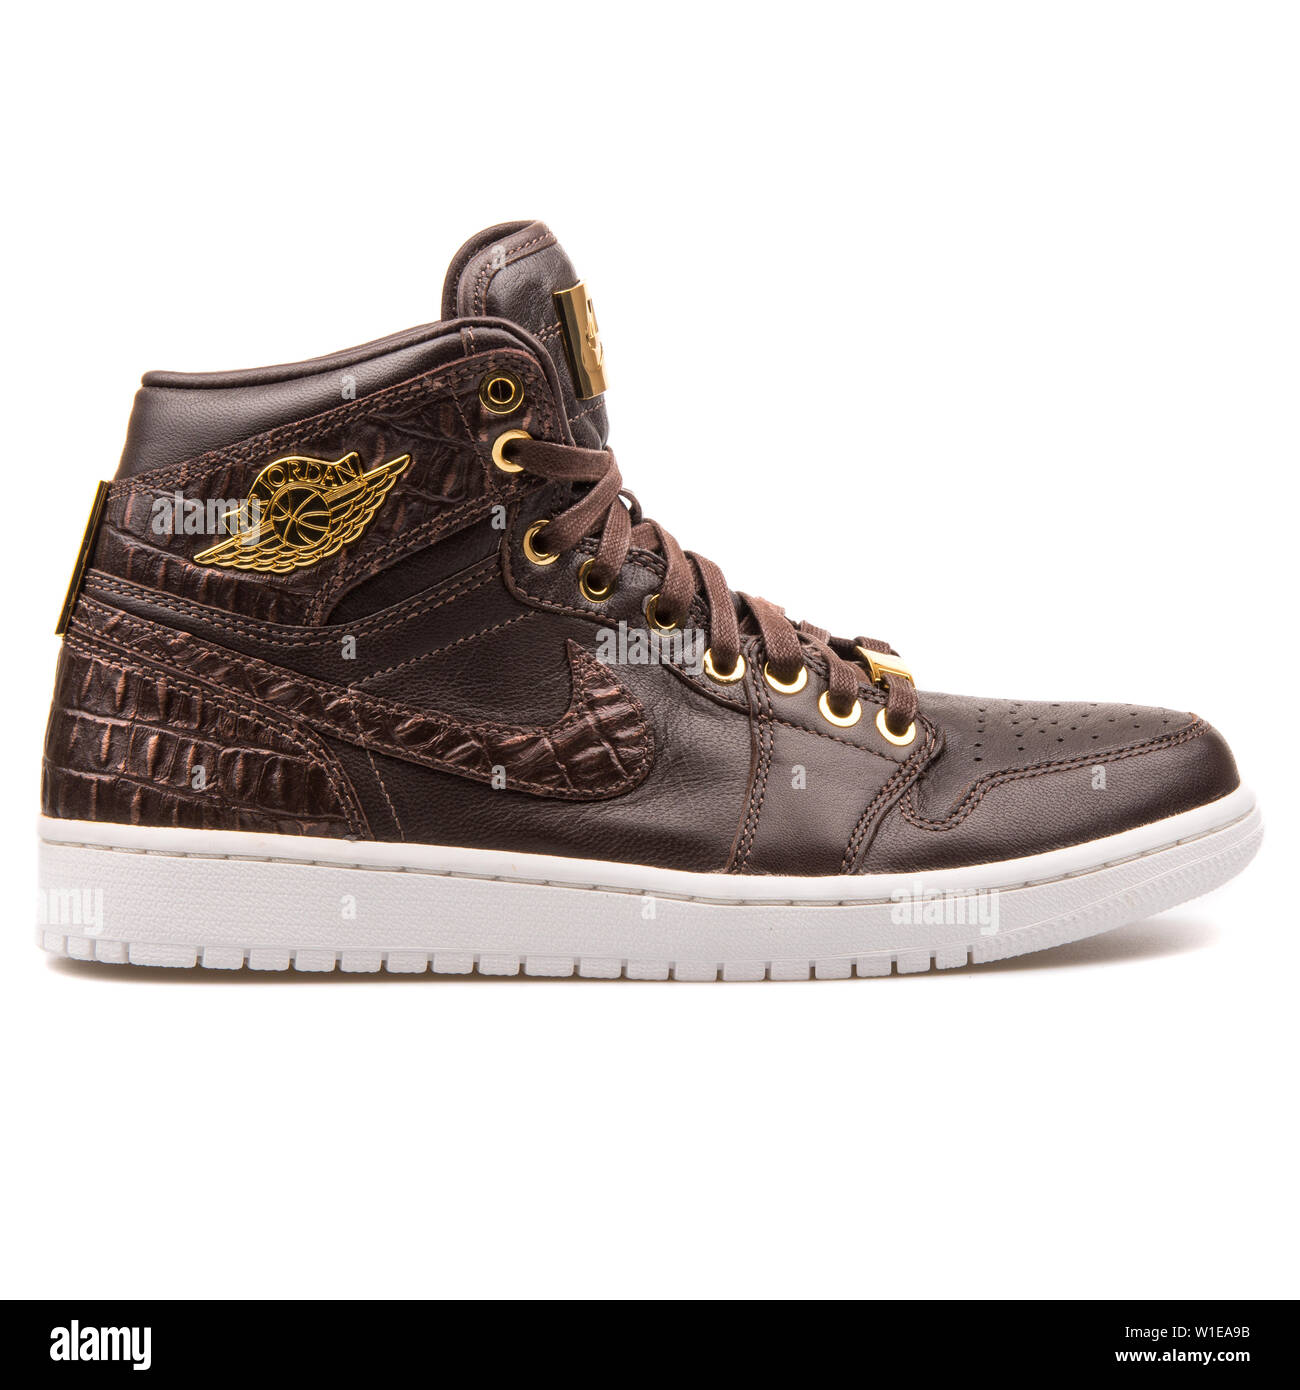 VIENNA, AUSTRIA - JUNE 14, 2017: Nike Air Jordan 1 Pinnacle brown and gold  sneaker isolated on white background Stock Photo - Alamy